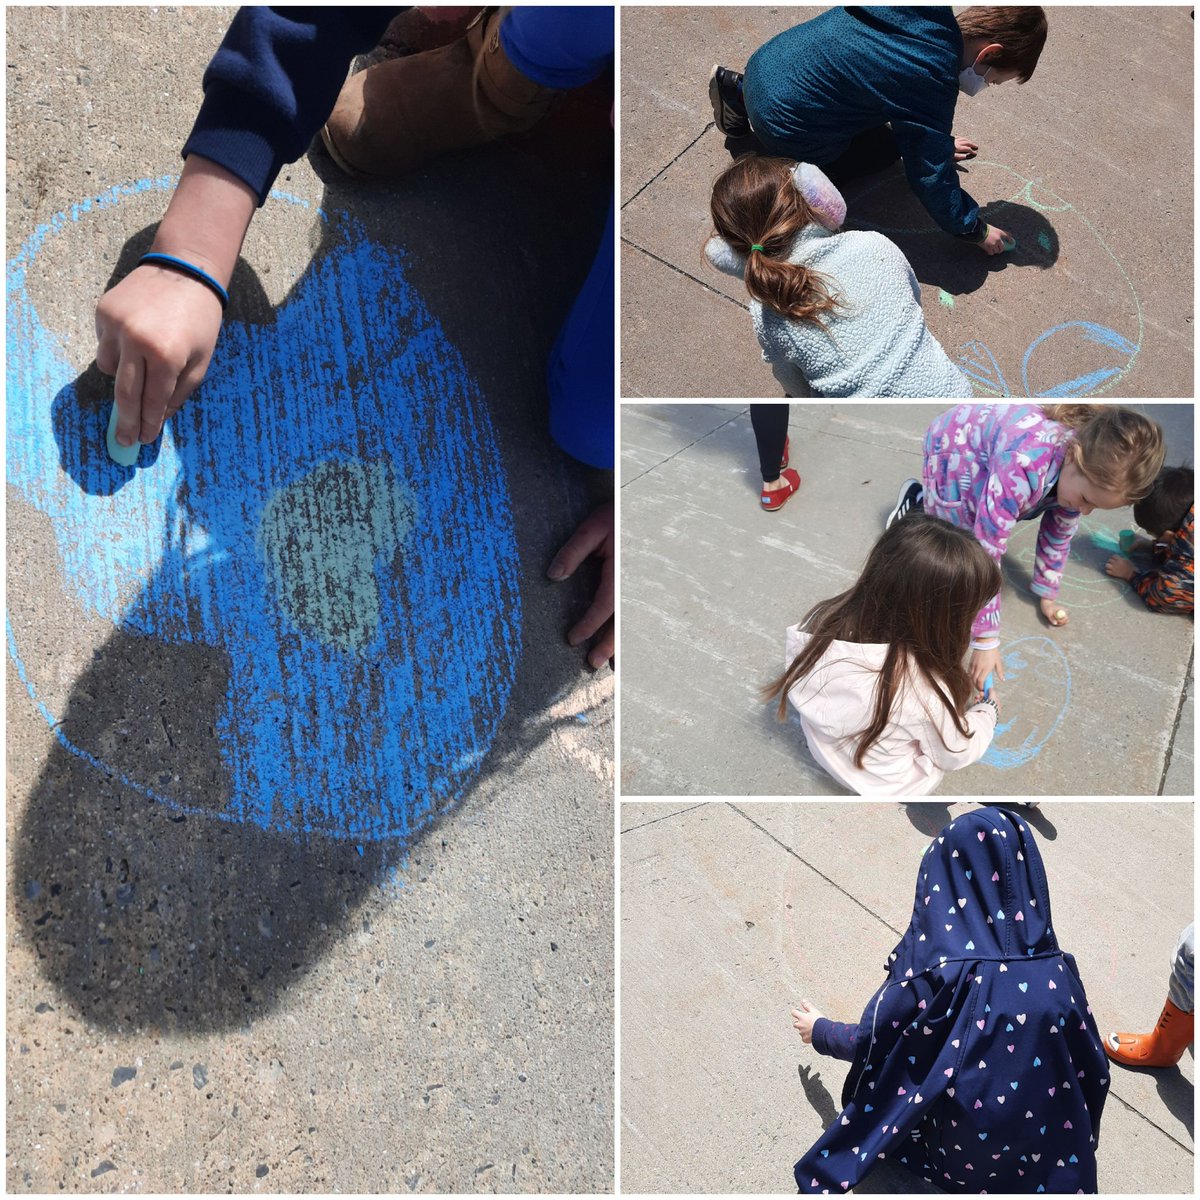 Love seeing our class be such great leaders with our kinder buddies today 🤍 after our #pitchinkingston yard clean up we did some earth day sidewalk chalk art 🌎